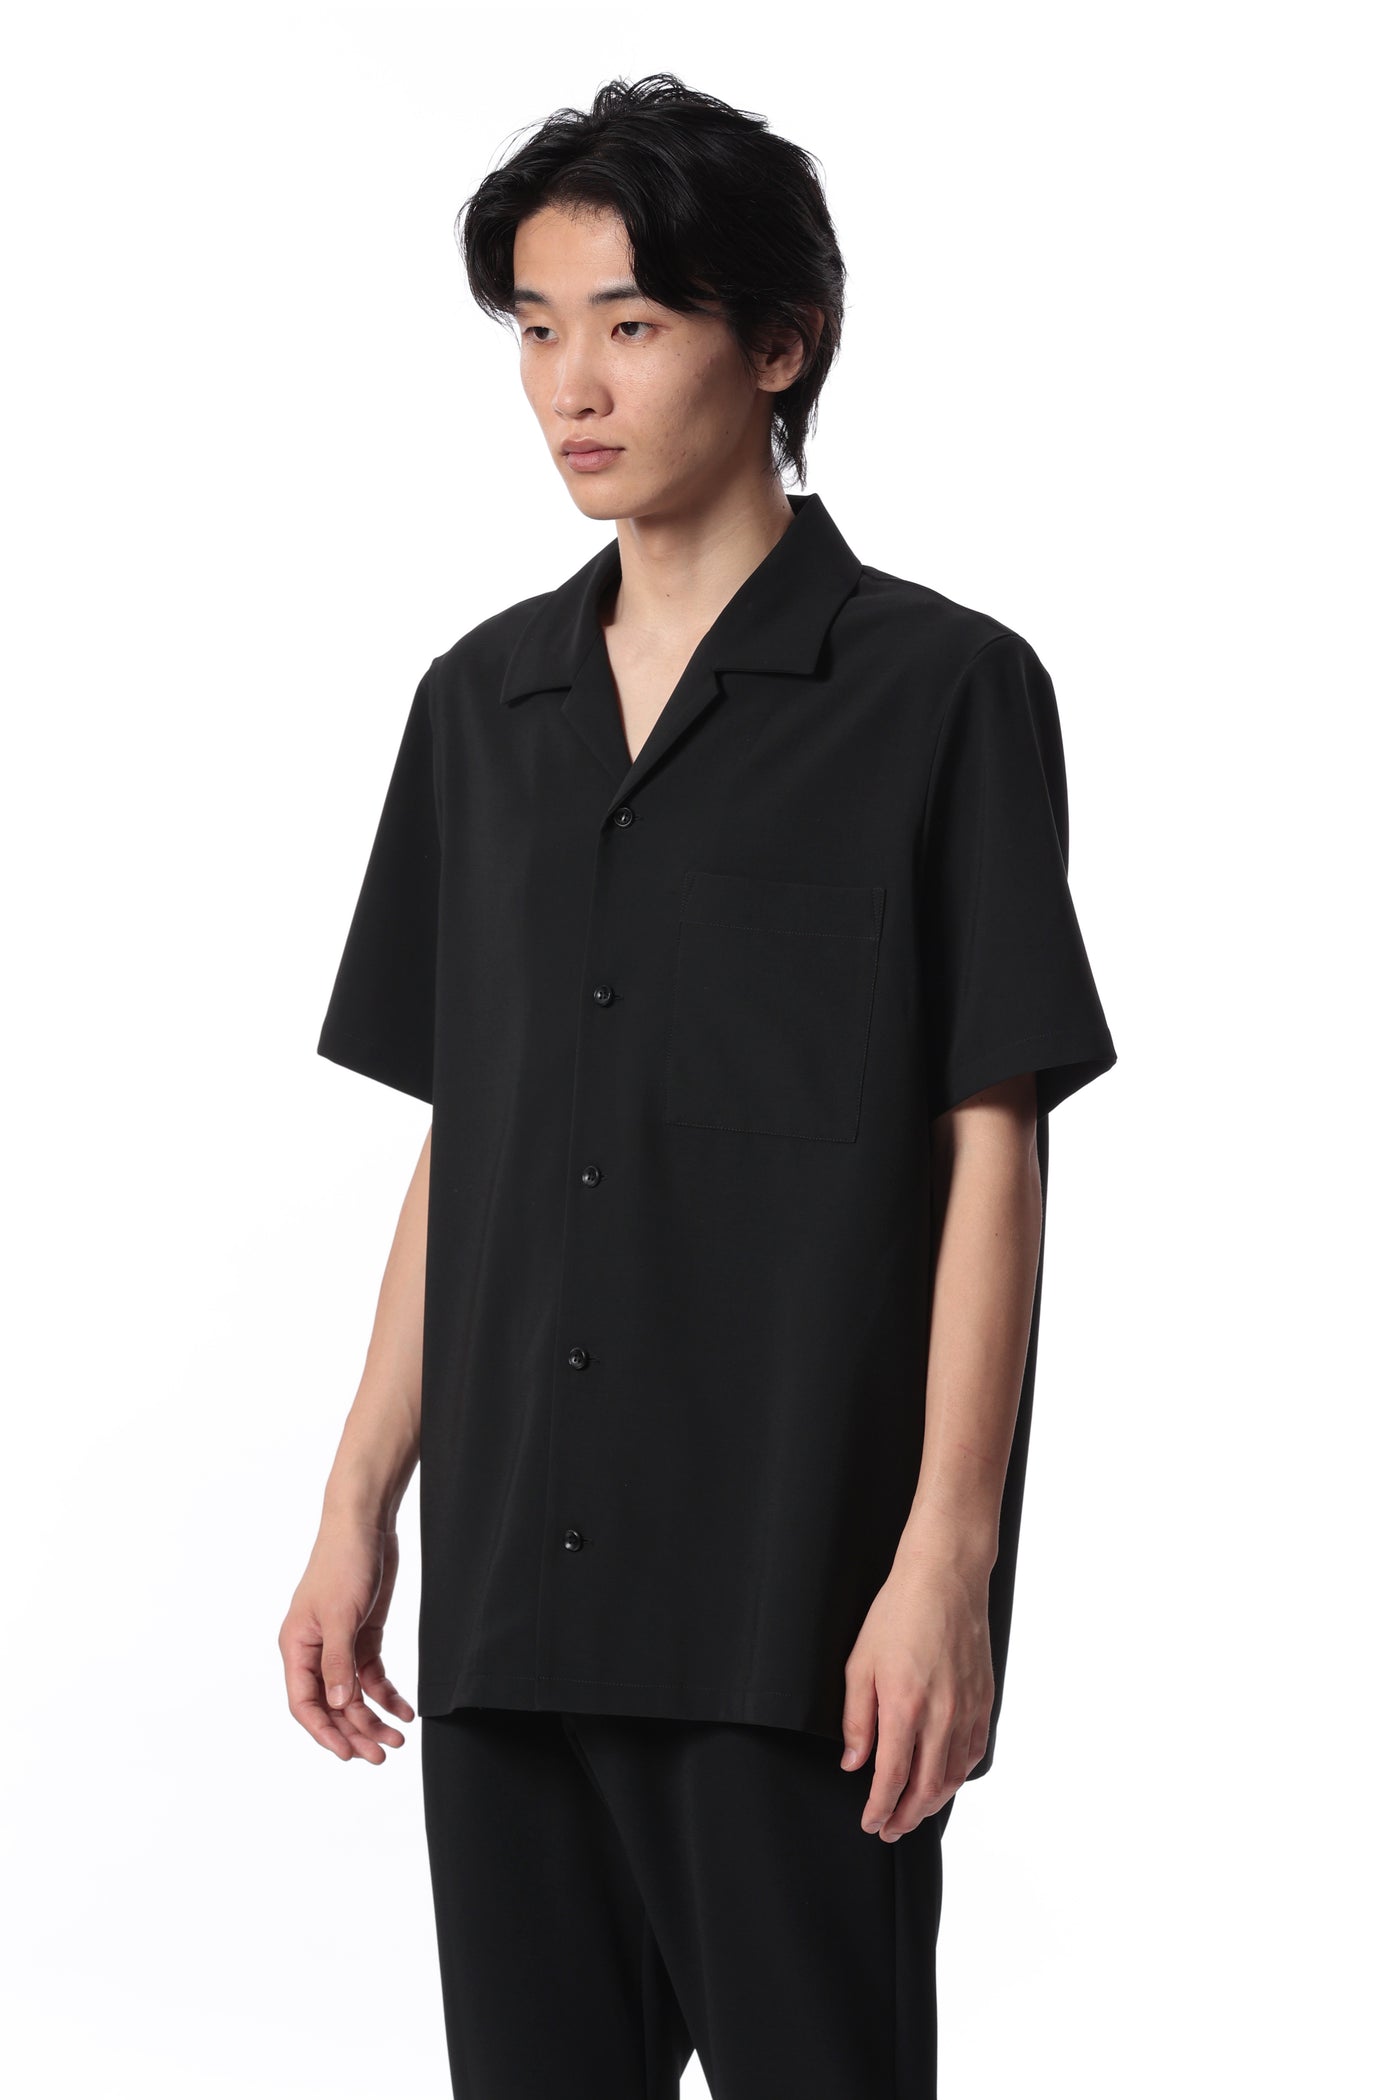 Released in February AS41-041 Polyester compact twill slim fit open collar shirt S/S